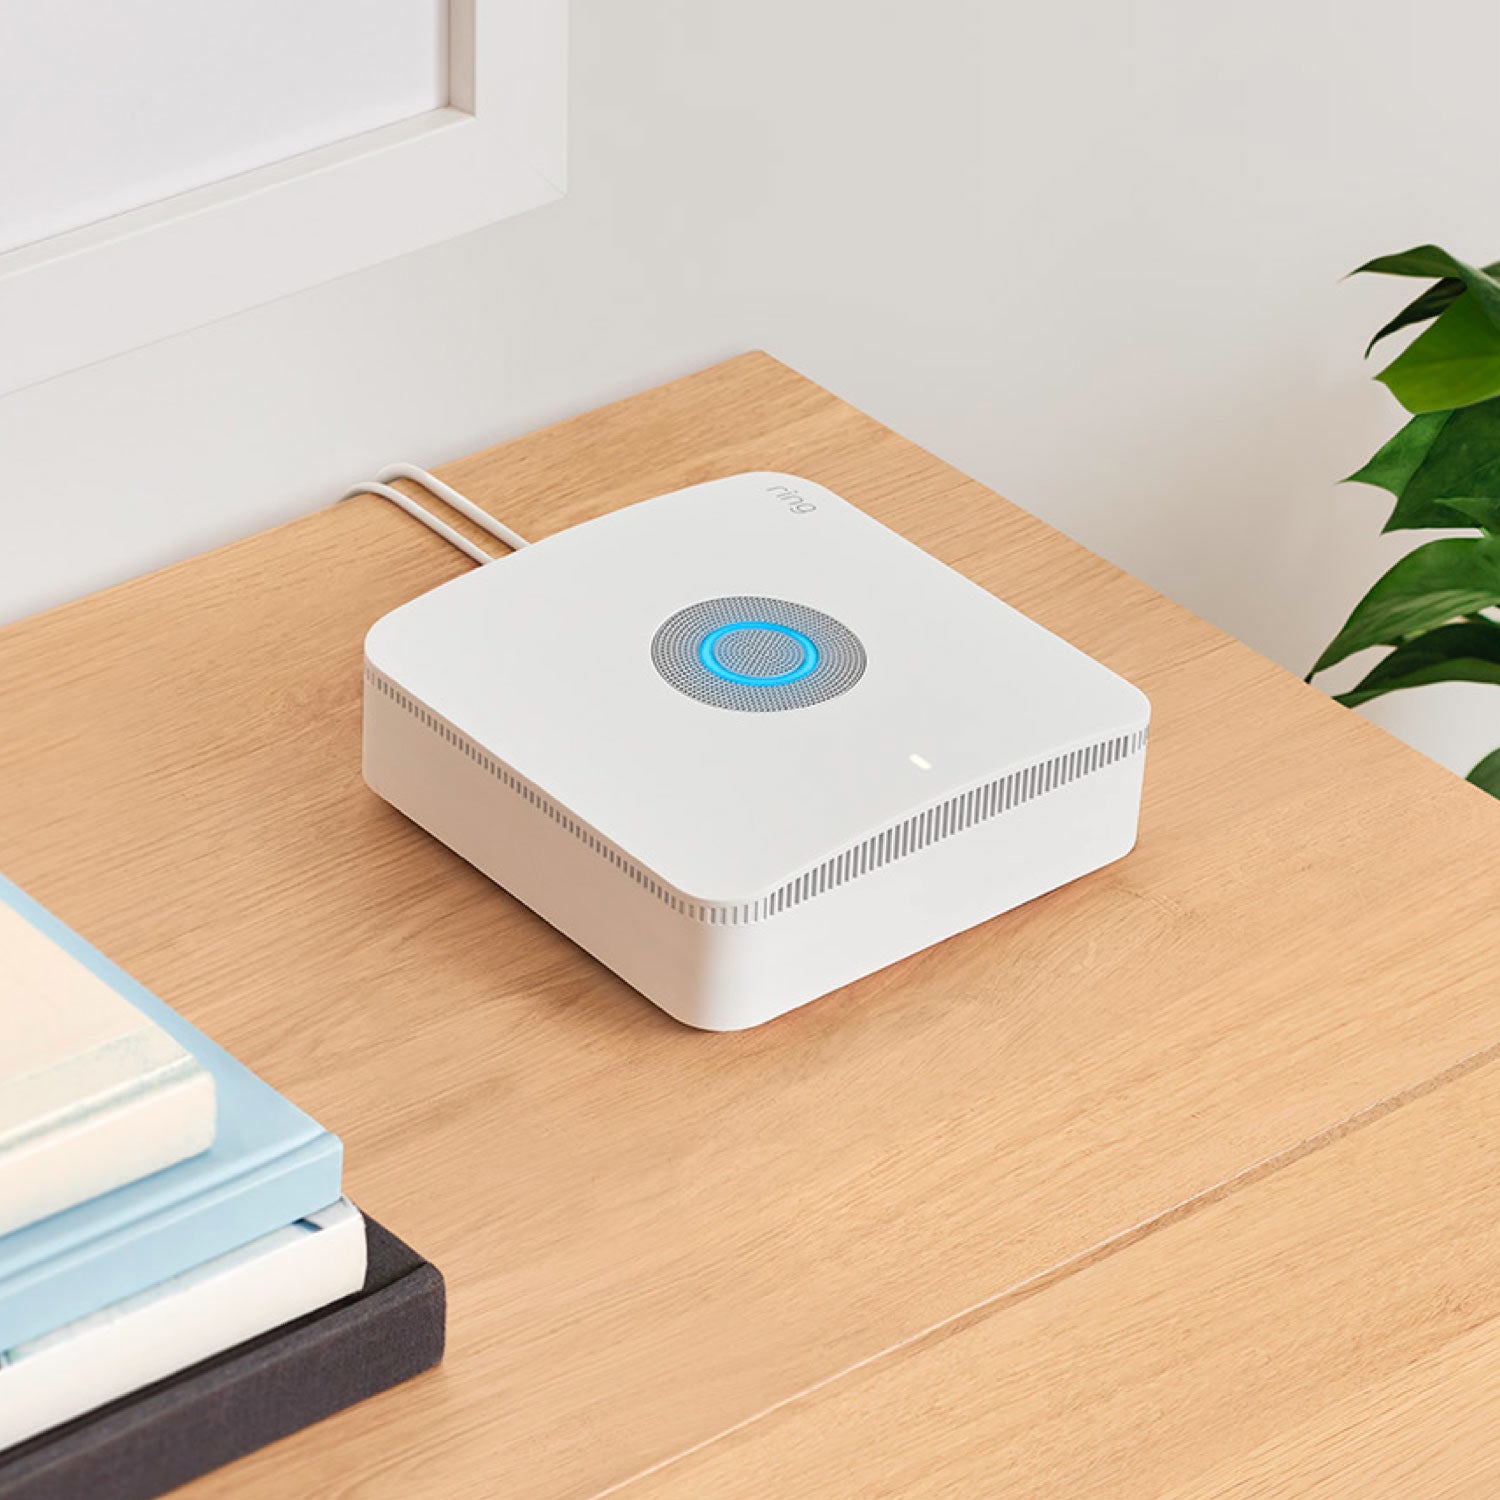 Alarm Pro Security Kit, 14-Piece (with built-in eero Wi-Fi 6 router) - Alarm Pro Base Station situated on wooden desktop next to some books.